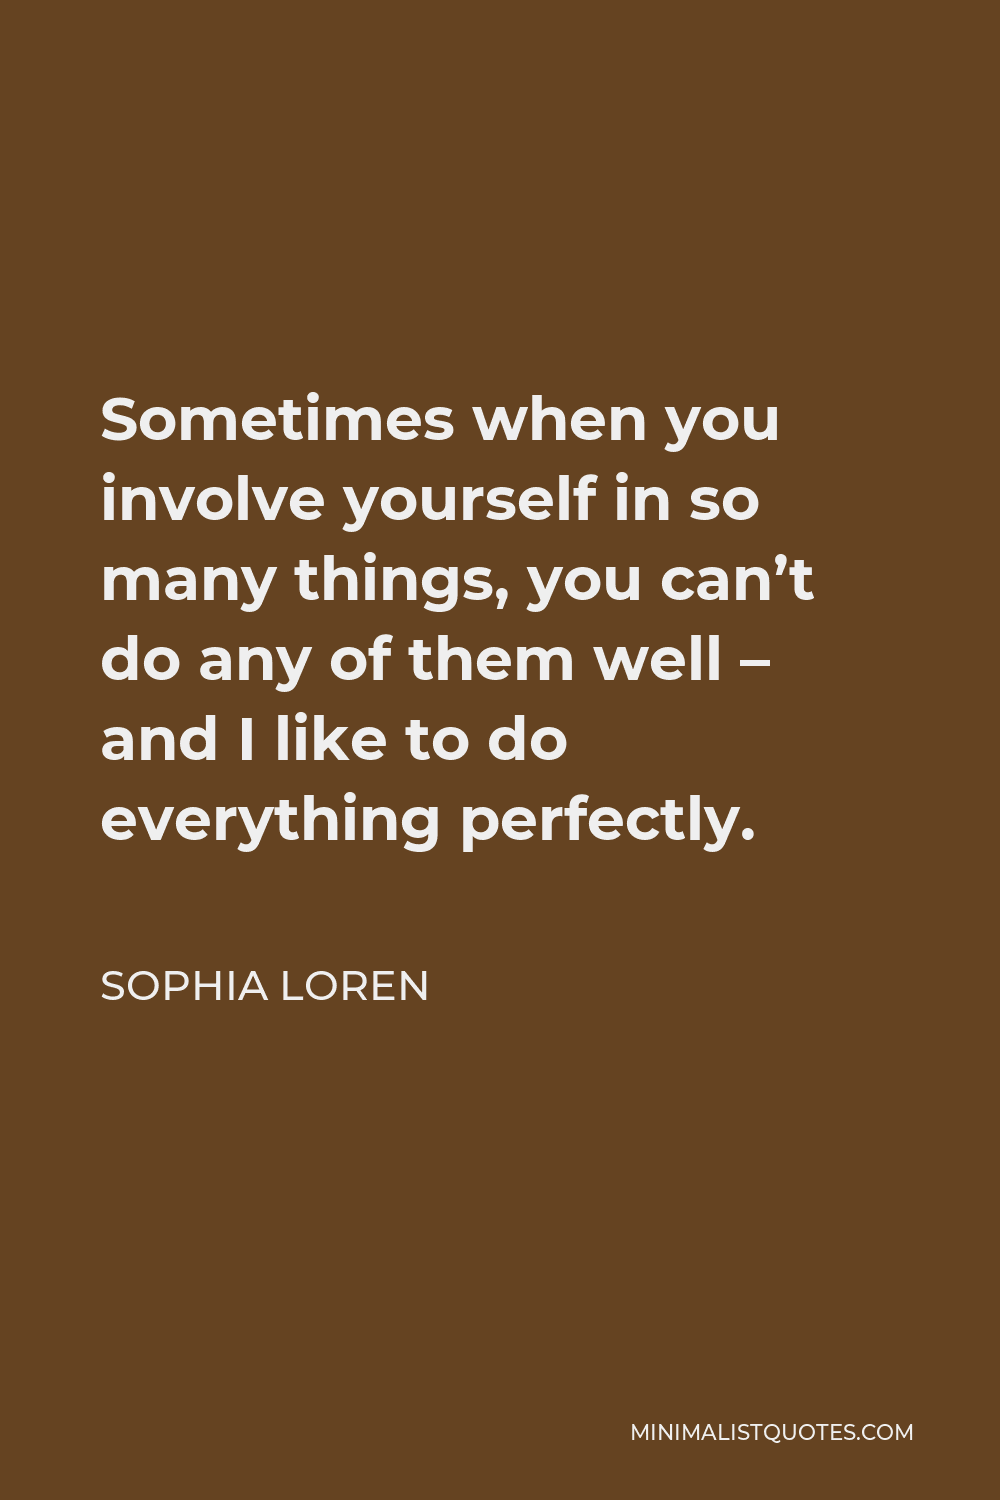 Sophia Loren Quote - Sometimes when you involve yourself in so many things, you can’t do any of them well – and I like to do everything perfectly.